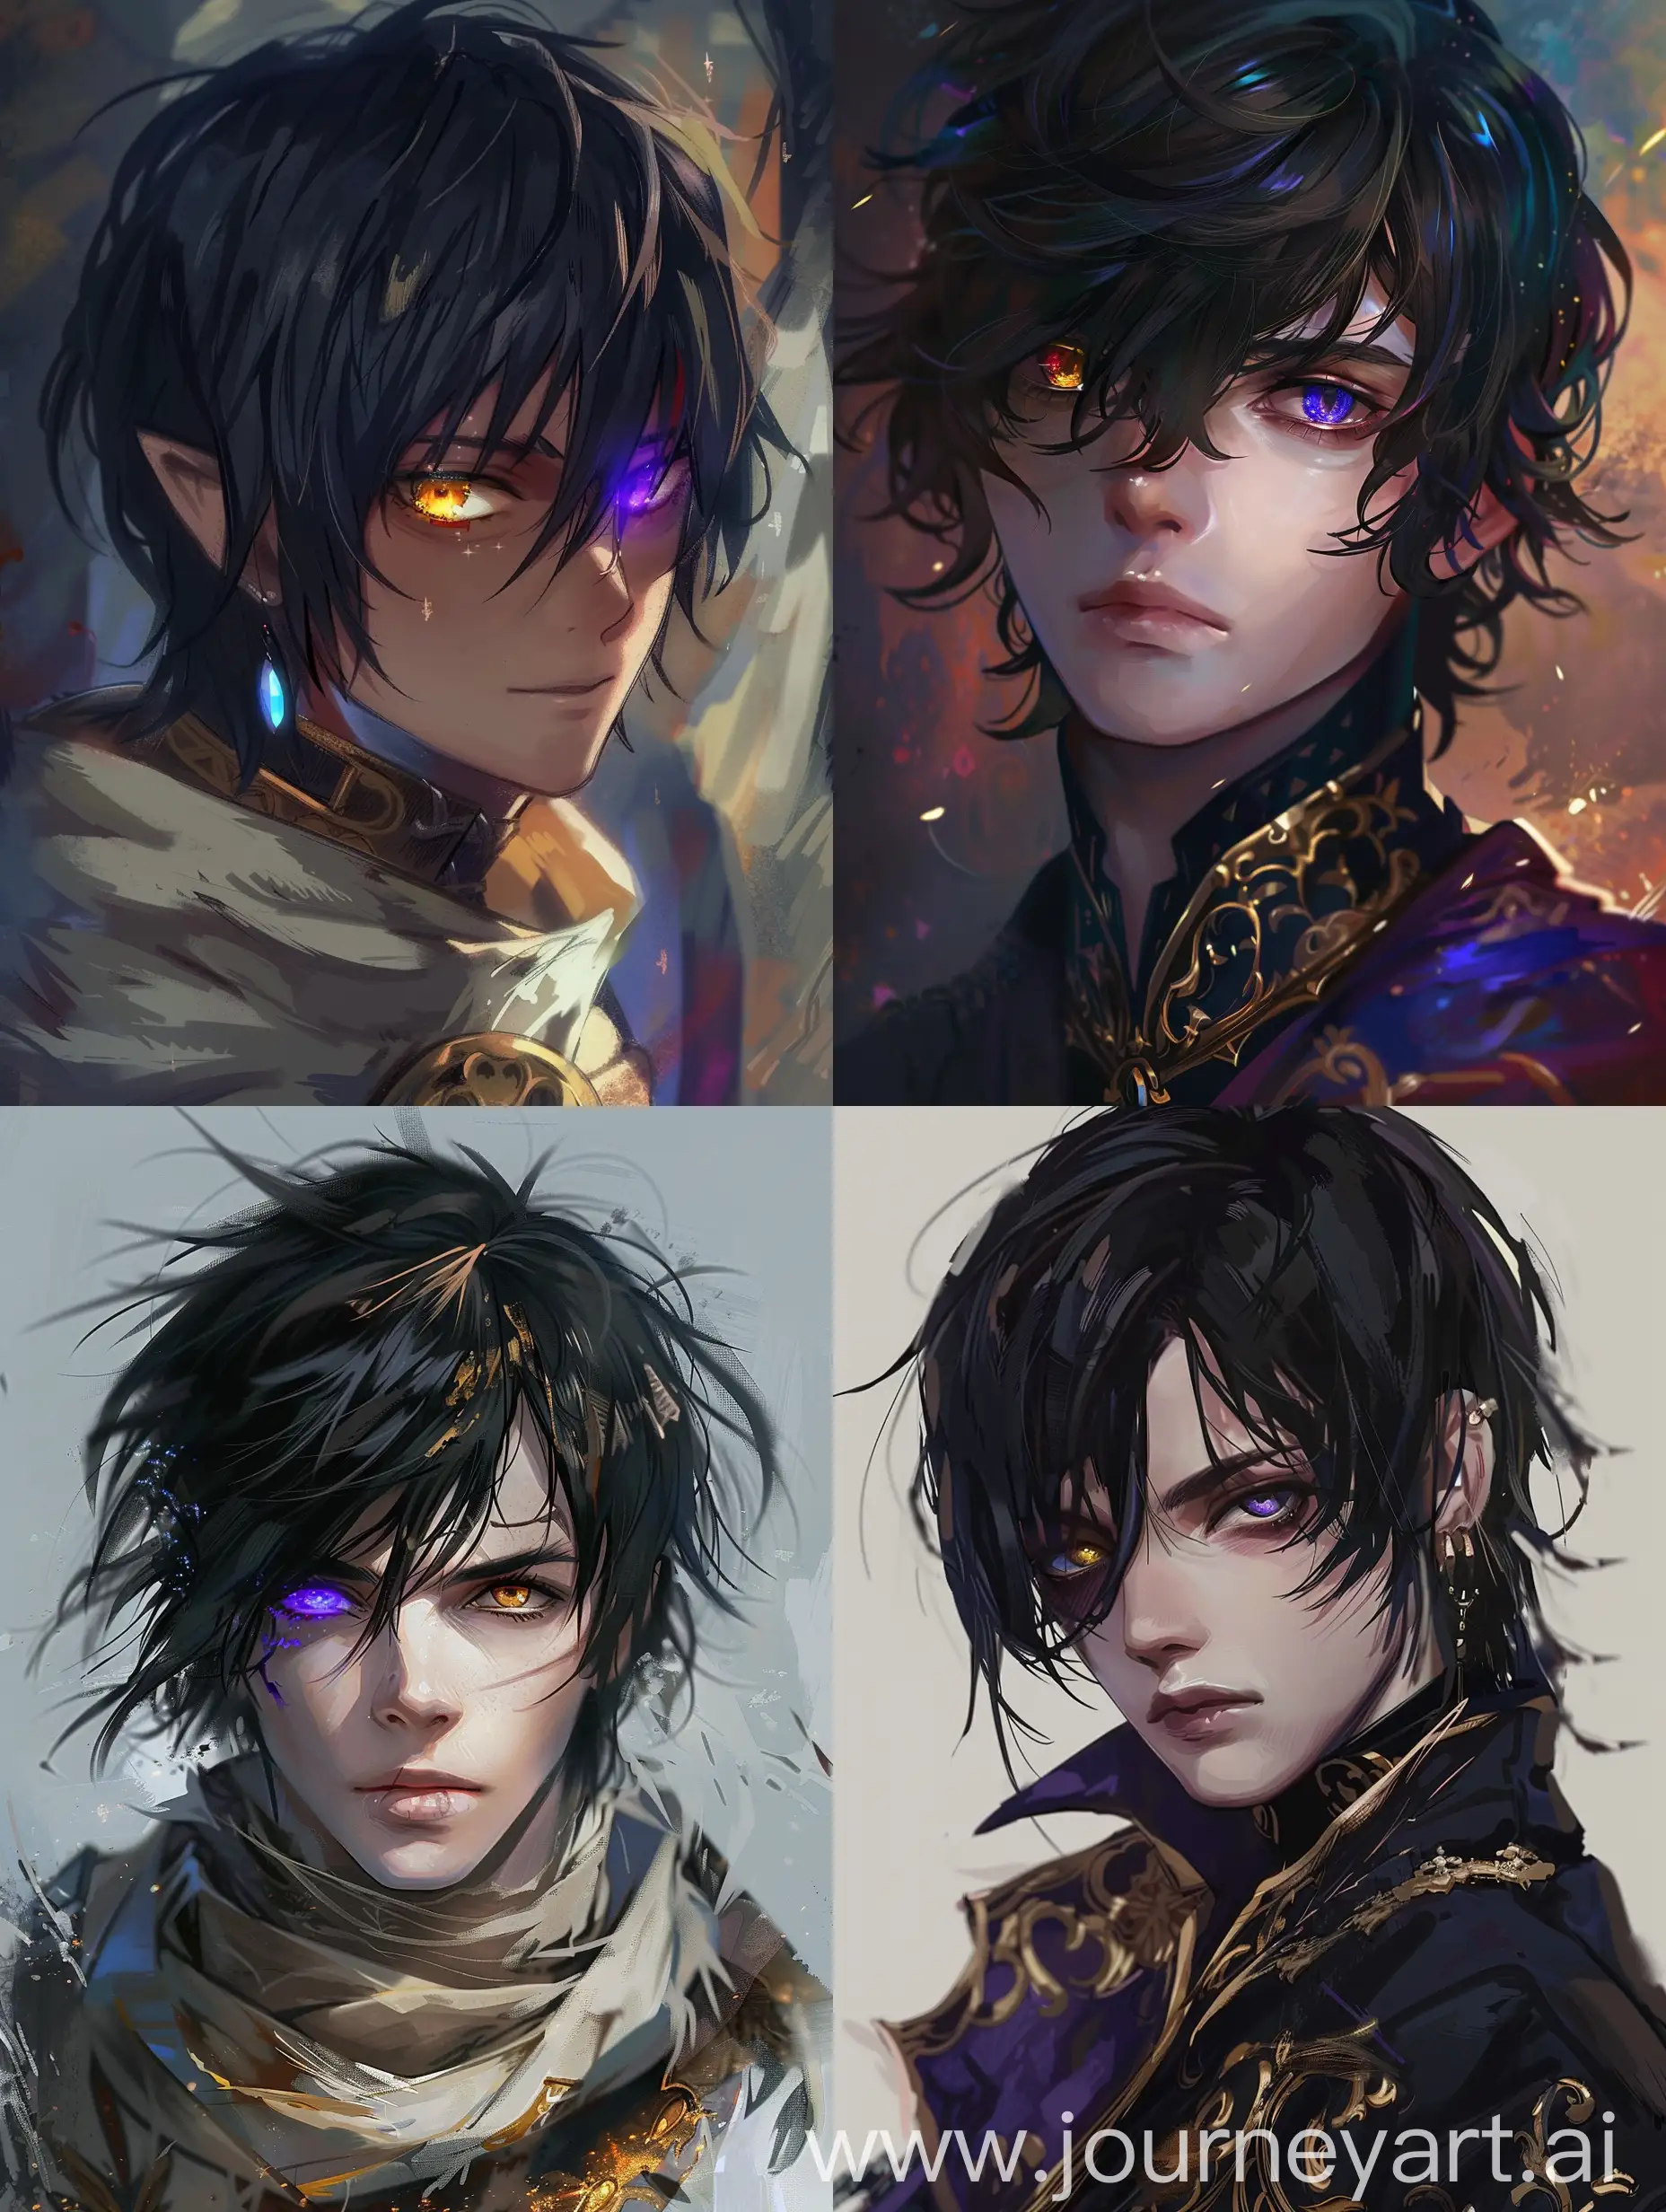 Anime style image.  The art depicts a young man with black hair and eyes of different colors;  his right eye is golden in color and his left eye is purple in color.  The character should be very handsome, dressed in medieval fantasy style clothing.